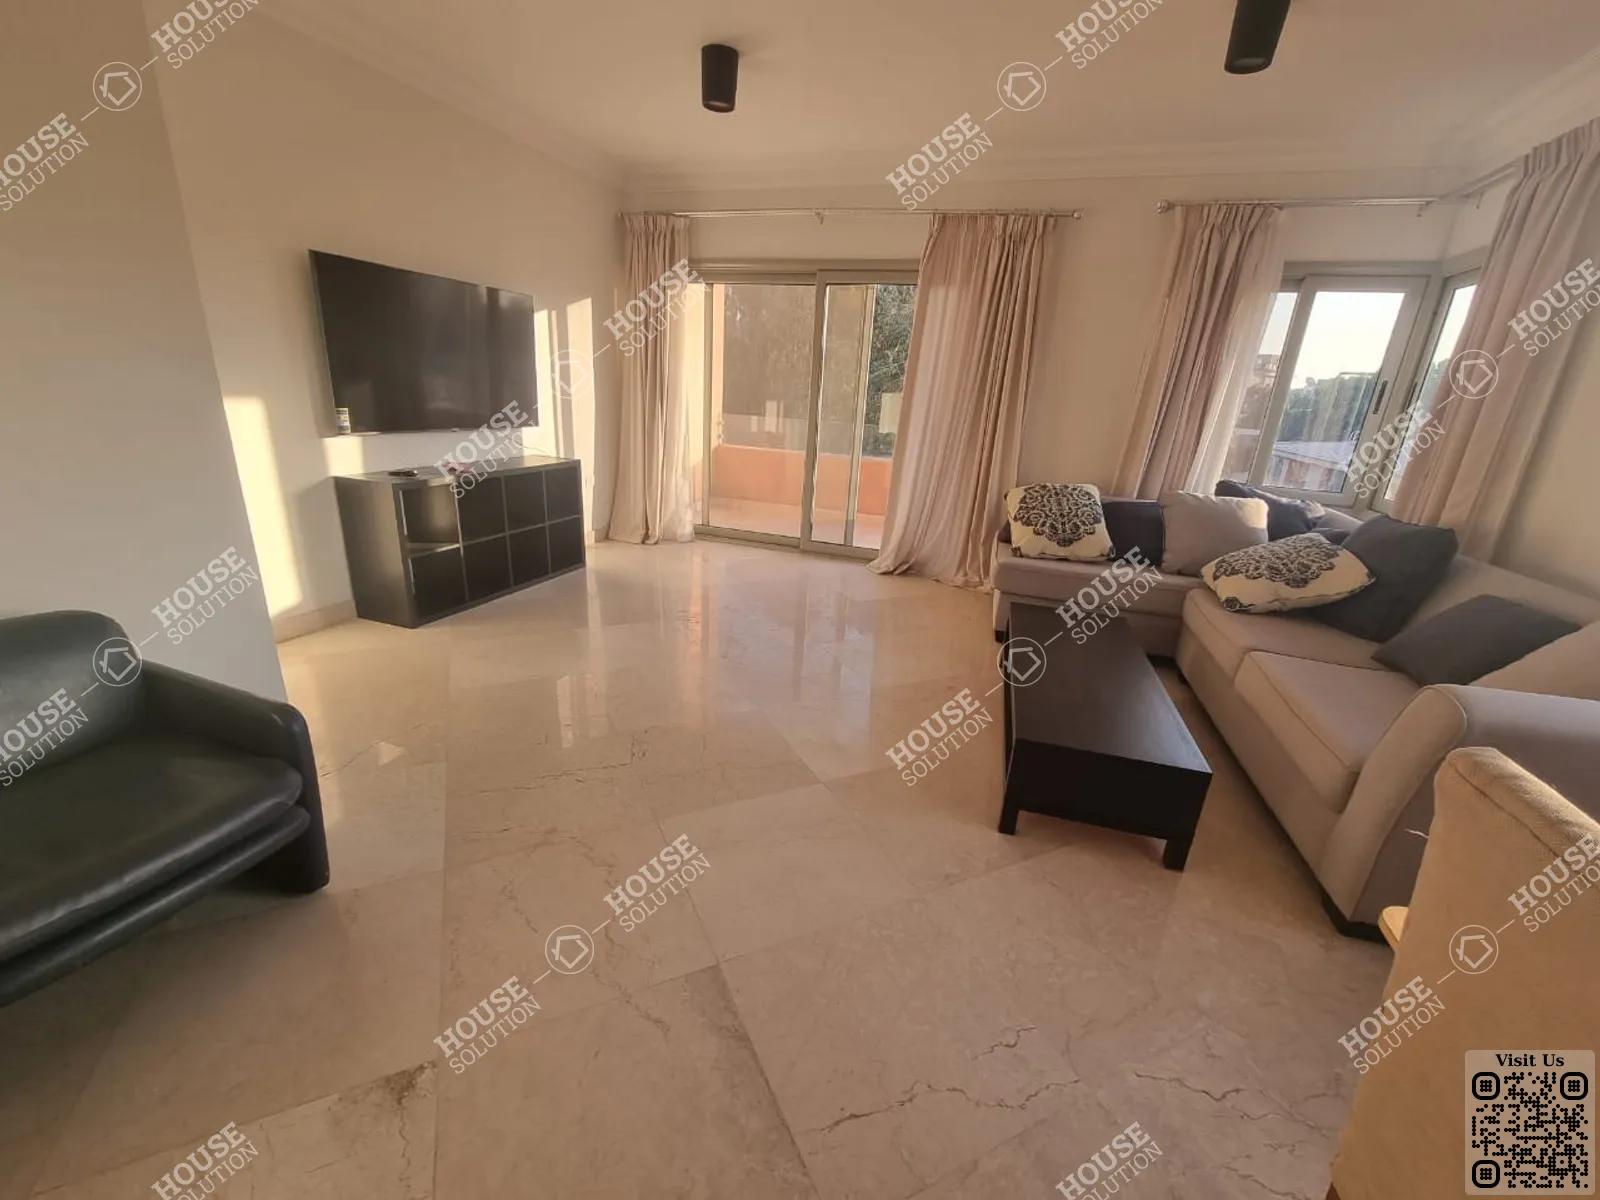 RECEPTION  @ Apartments For Rent In Maadi Maadi Degla Area: 150 m² consists of 2 Bedrooms 3 Bathrooms Modern furnished 5 stars #5627-0